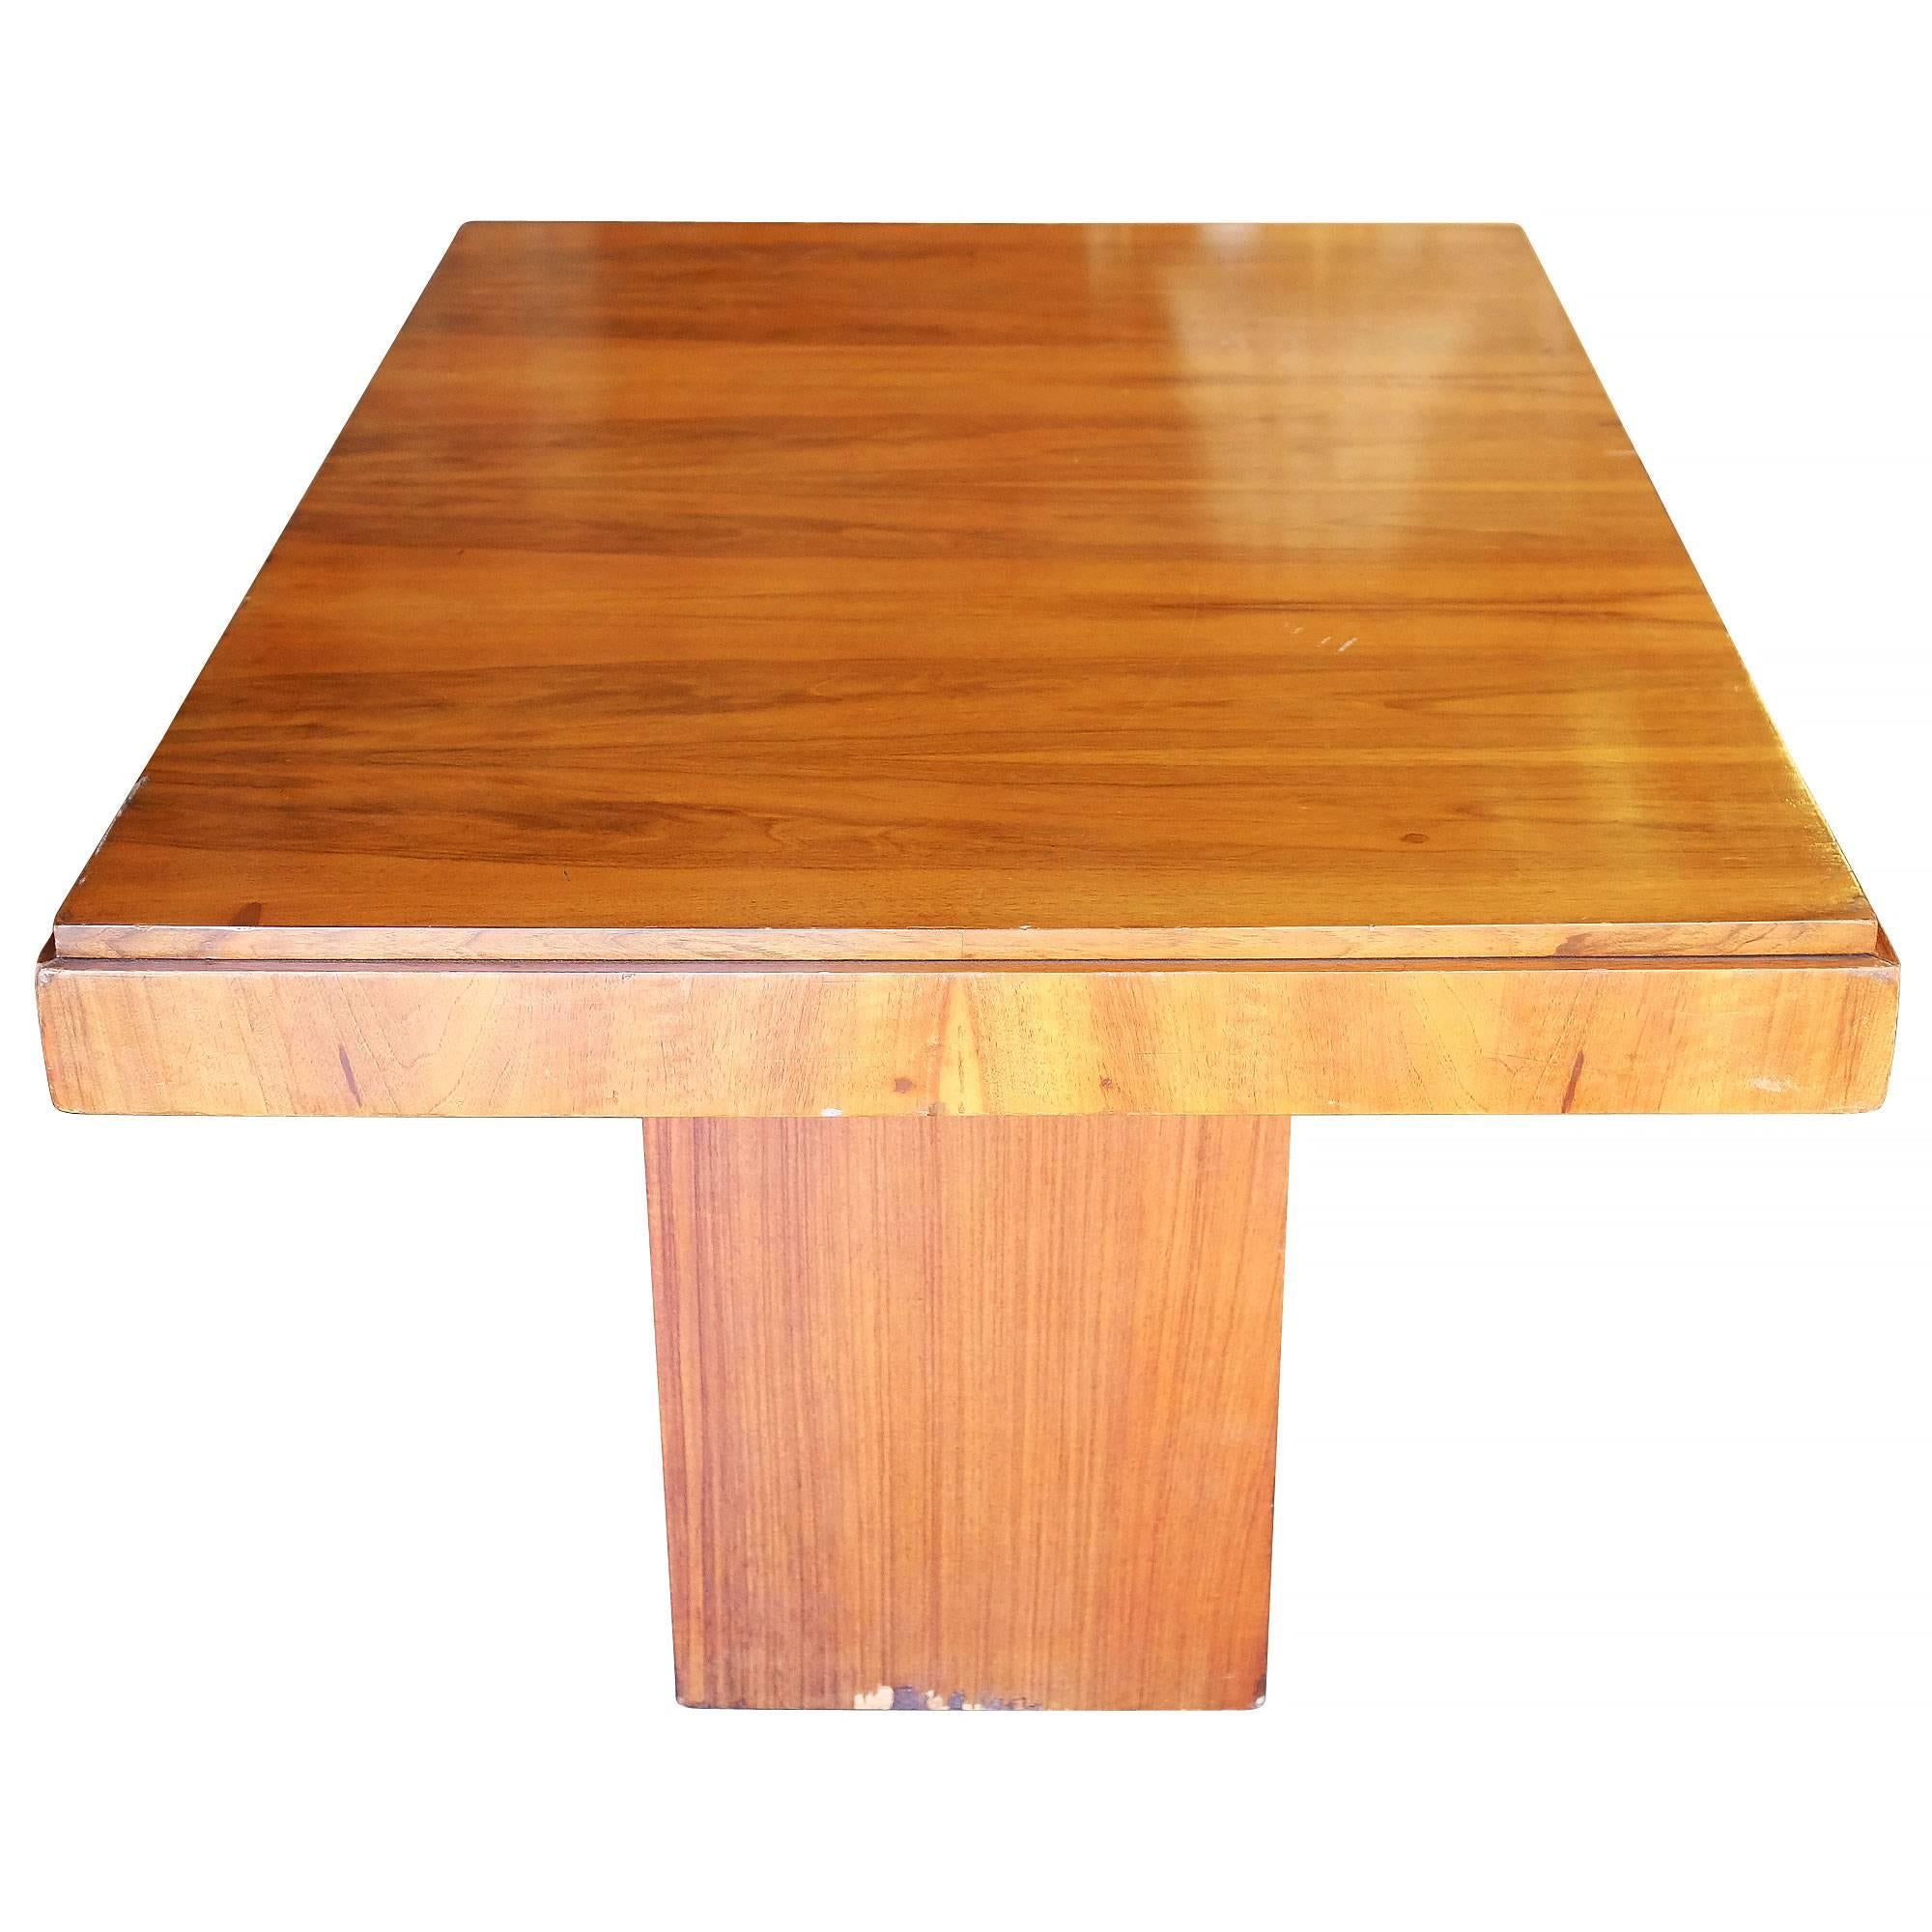 Art Deco Charles Dudouyt Cubist Inspired Walnut Desk / Dining Table